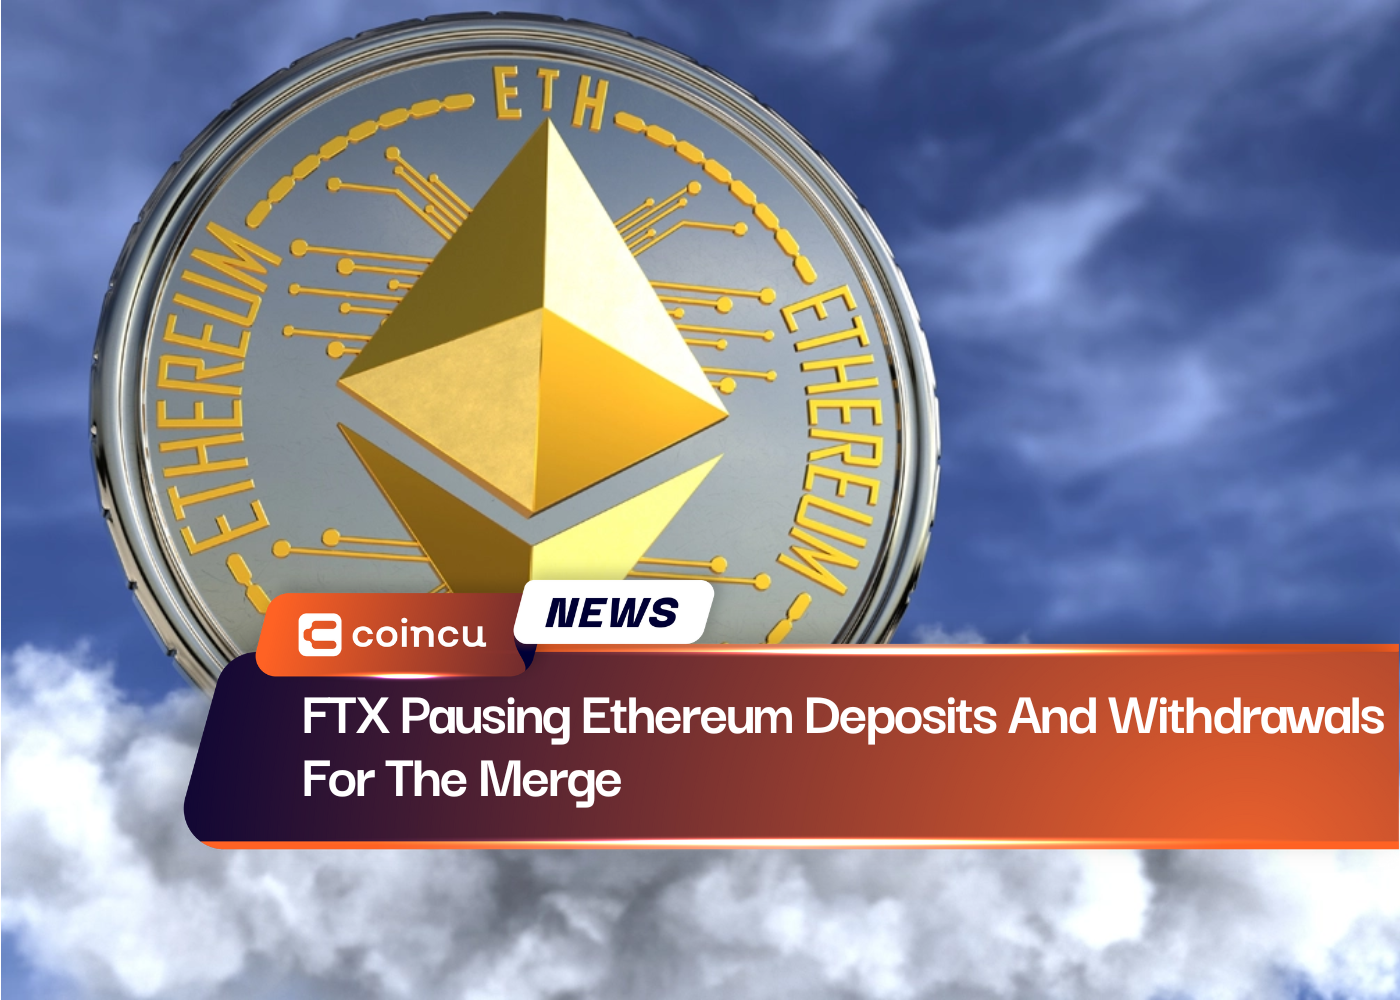 FTX Pausing Ethereum Deposits And Withdrawals For The Merge